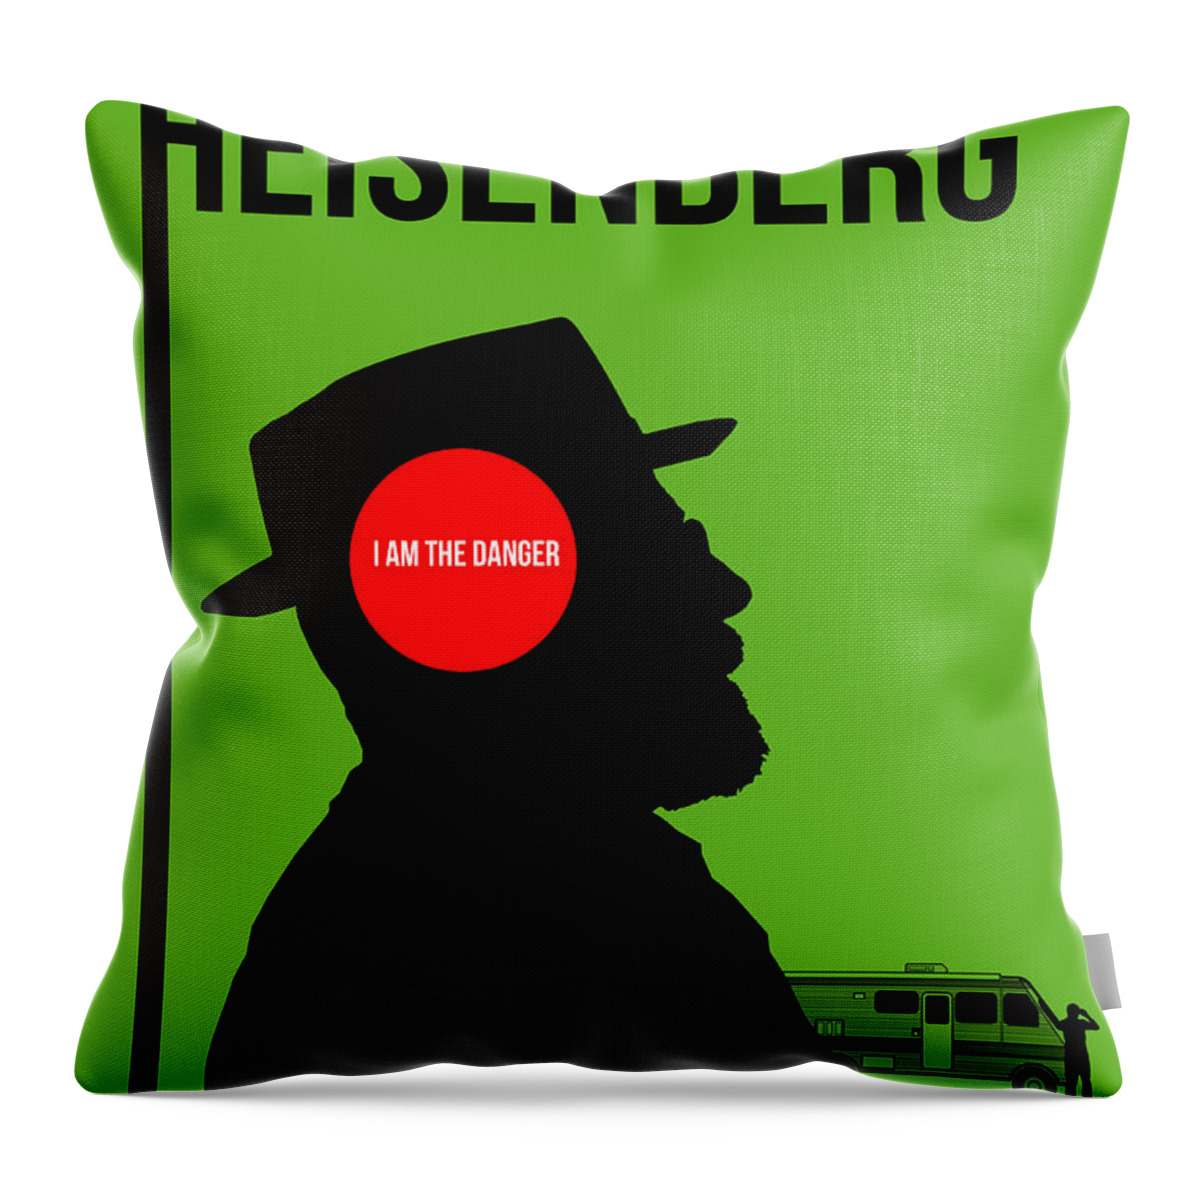 Breaking Bad Throw Pillow featuring the digital art I'm Danger Poster 1 by Naxart Studio